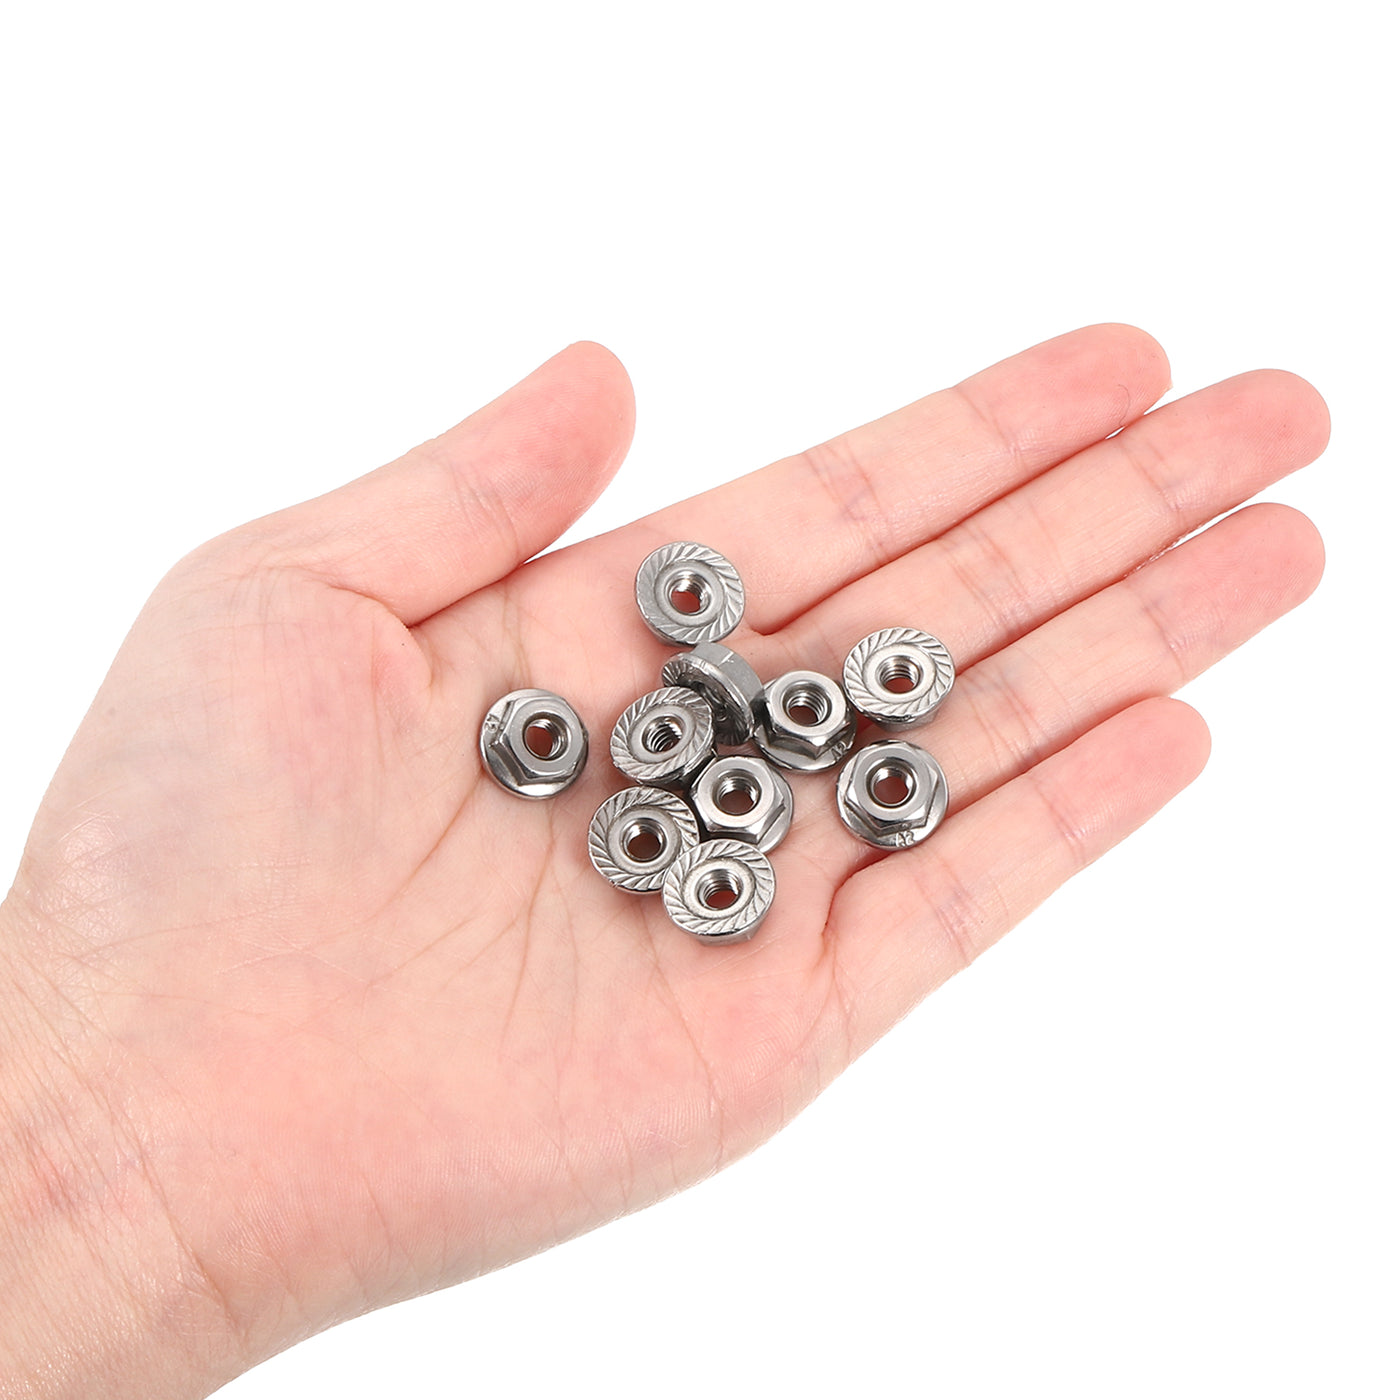 uxcell Uxcell 5/16-18 Serrated Flange Hex Lock Nuts, 20Pcs Hexagon Flange Nut, Silver